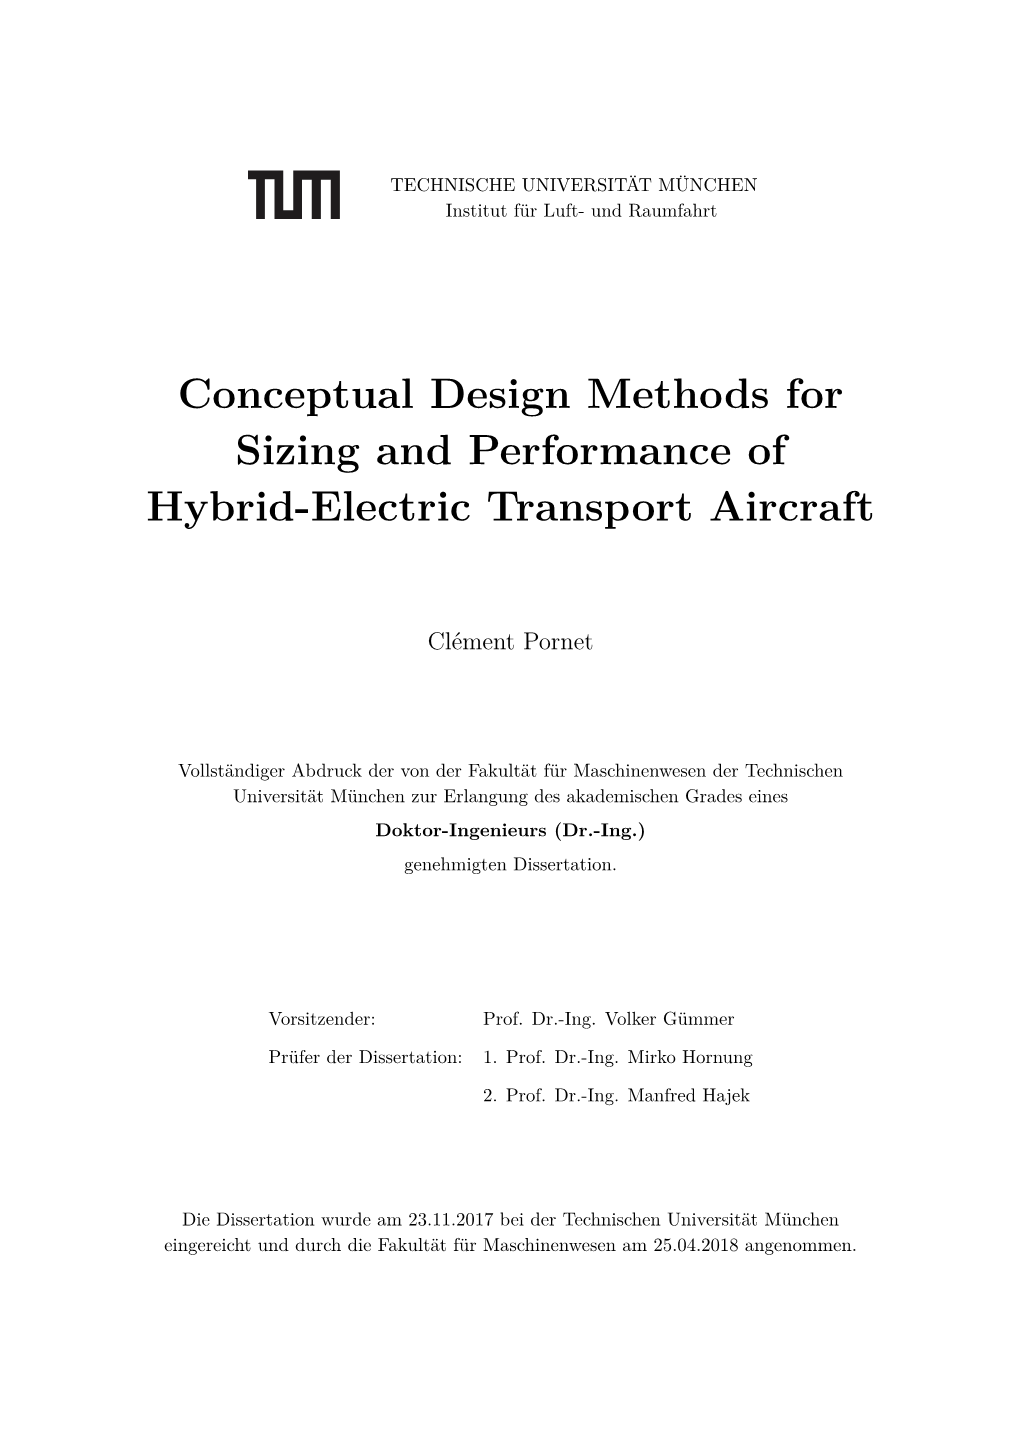 Conceptual Design Methods for Sizing and Performance of Hybrid-Electric Transport Aircraft